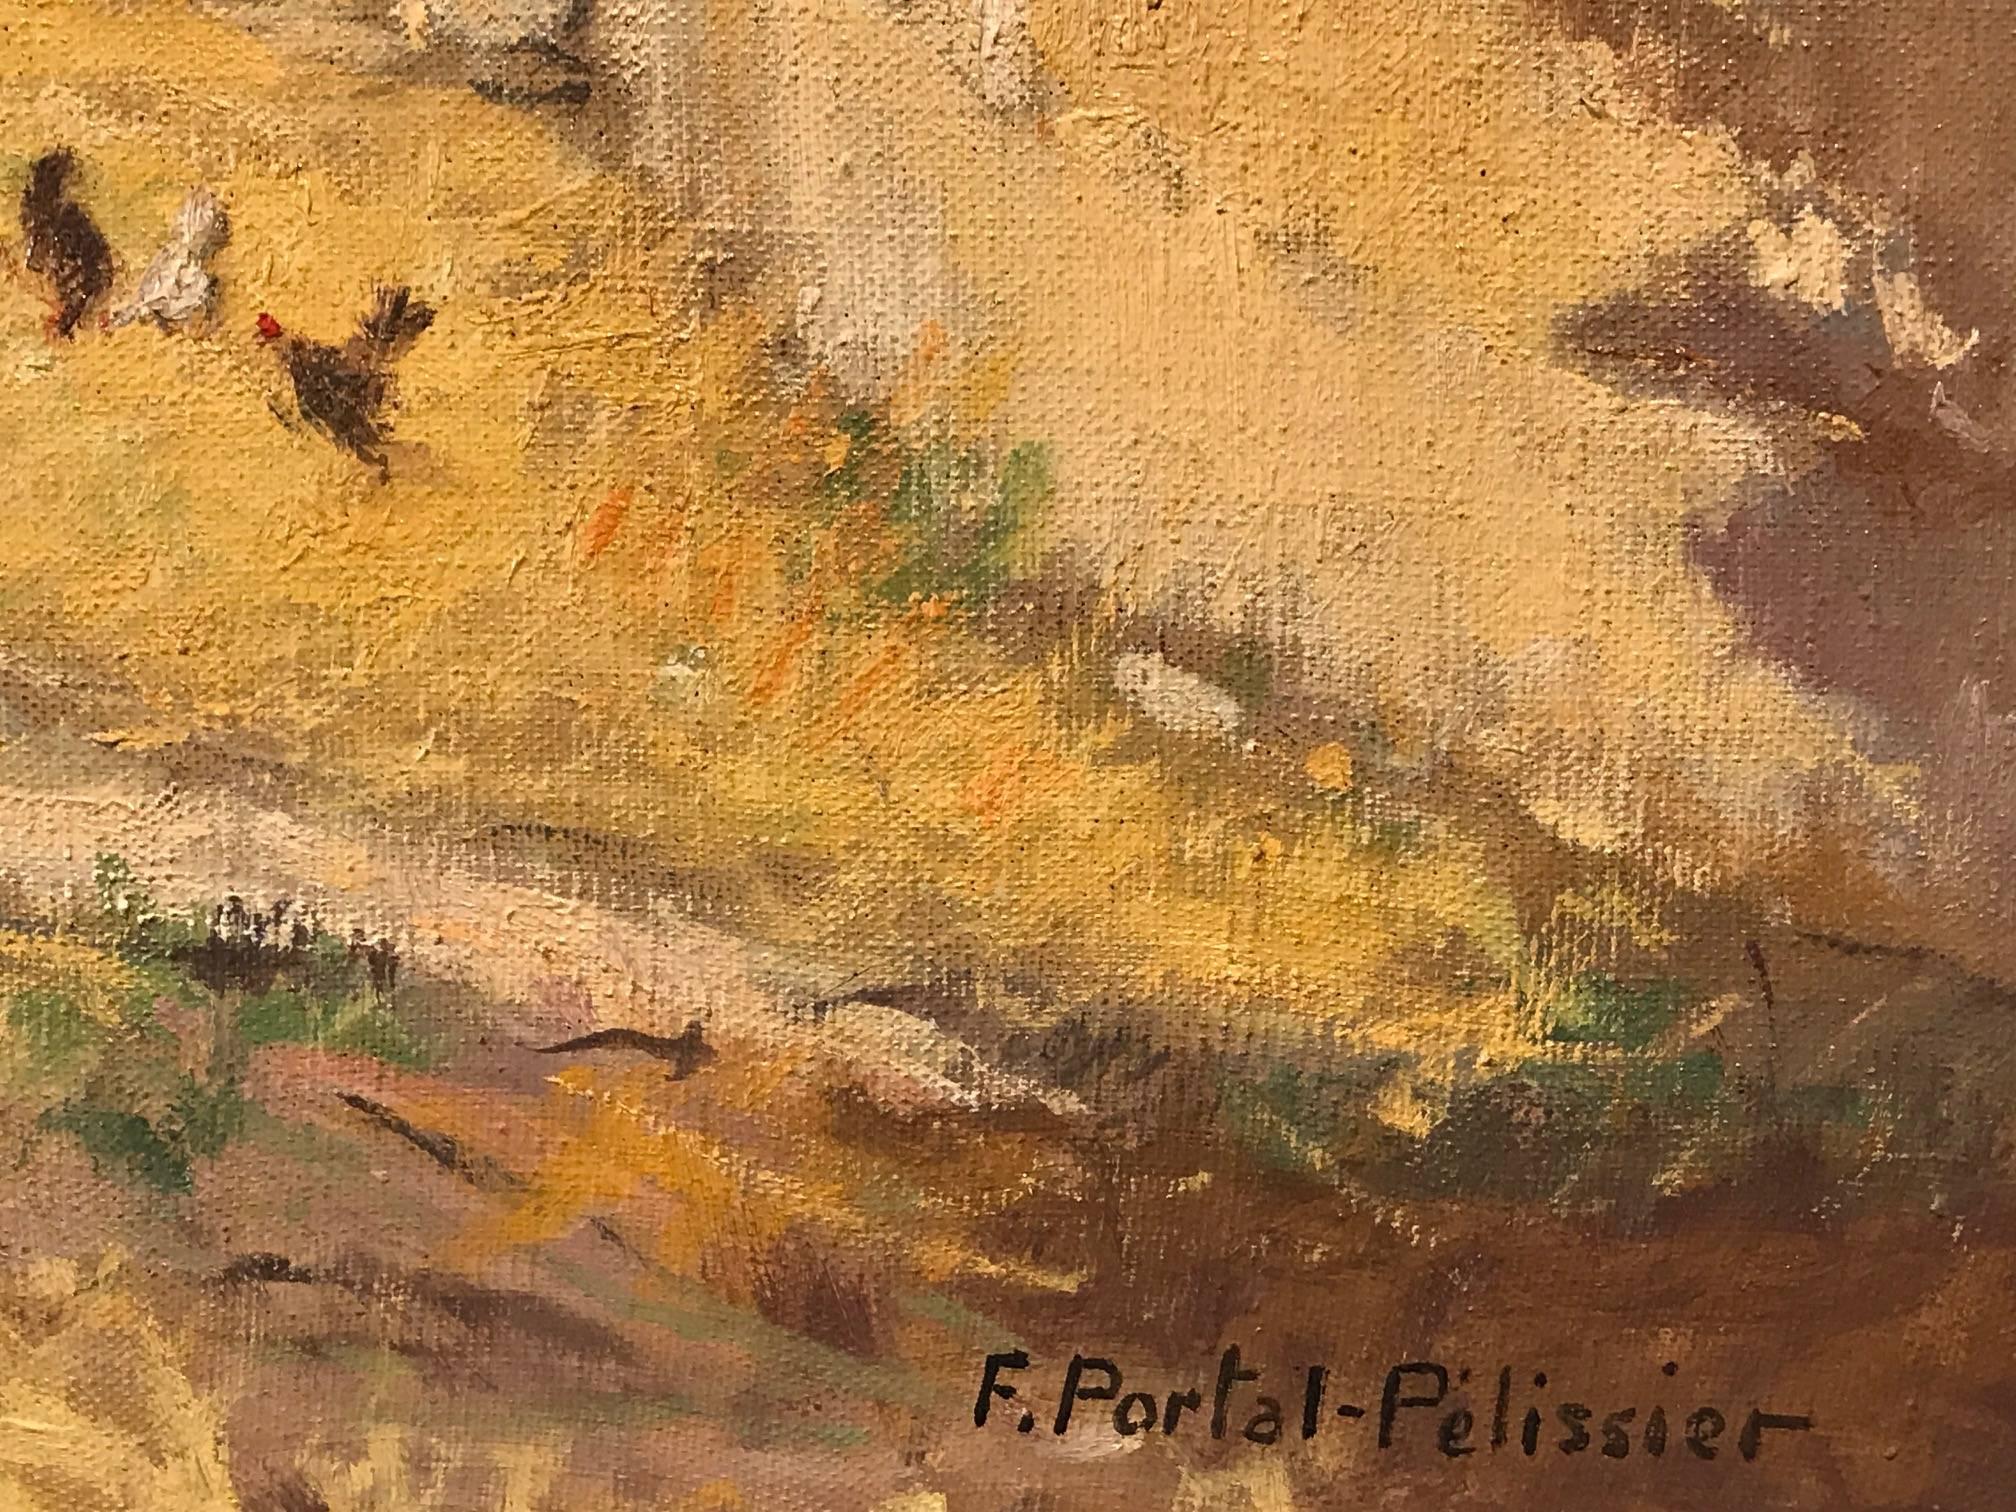 French Impressionist Oil - Provencal Farmhouse with Chickens - Brown Animal Painting by F. Portal-Pelissier